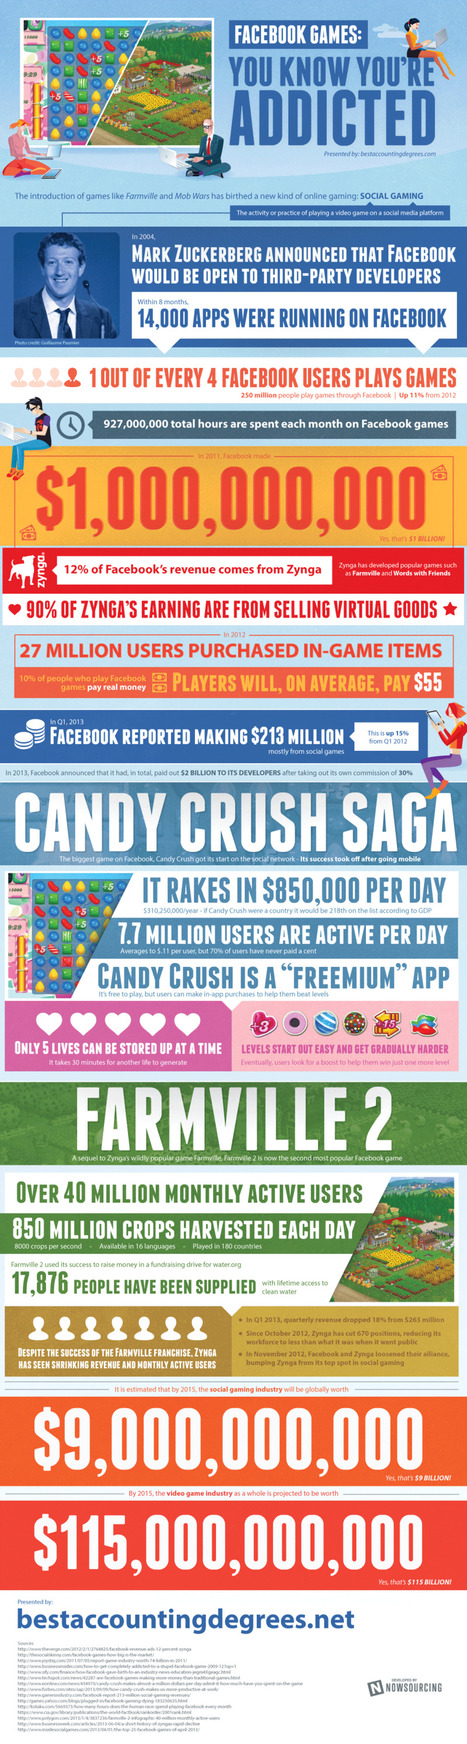 The Growth Of Facebook Games And Just How Addictive Are They? #infographic | Must Play | Scoop.it